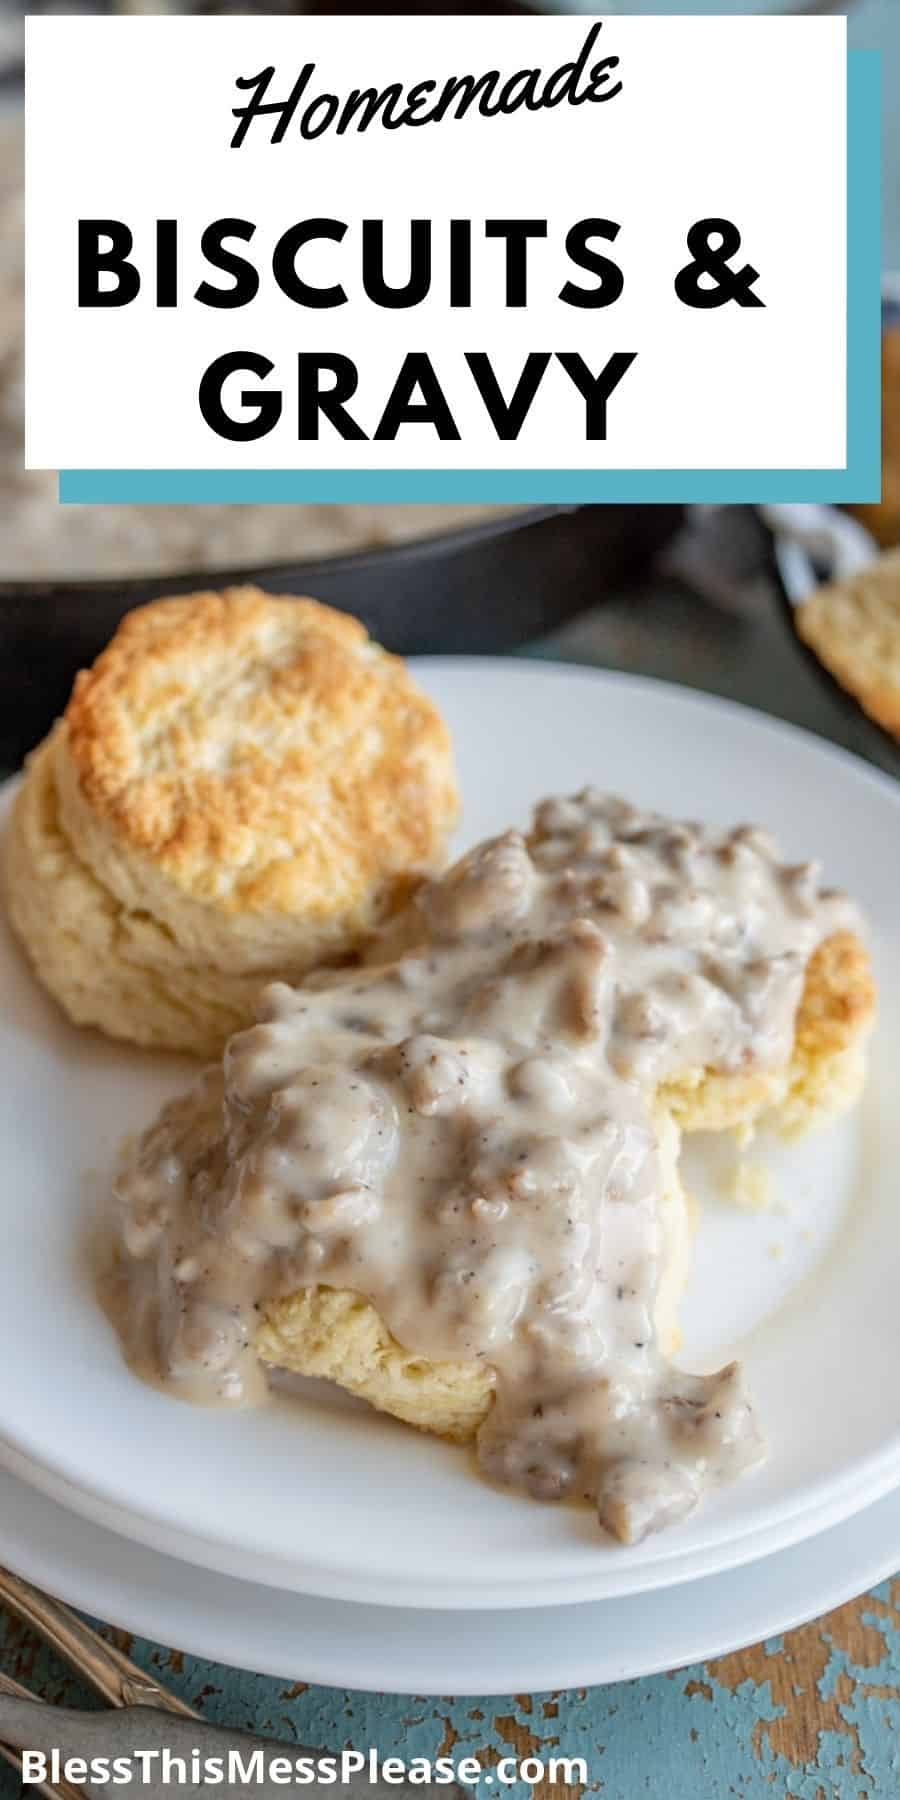 Plate of biscuits and gravy with the words "homemade biscuits and gravy" written at the top.